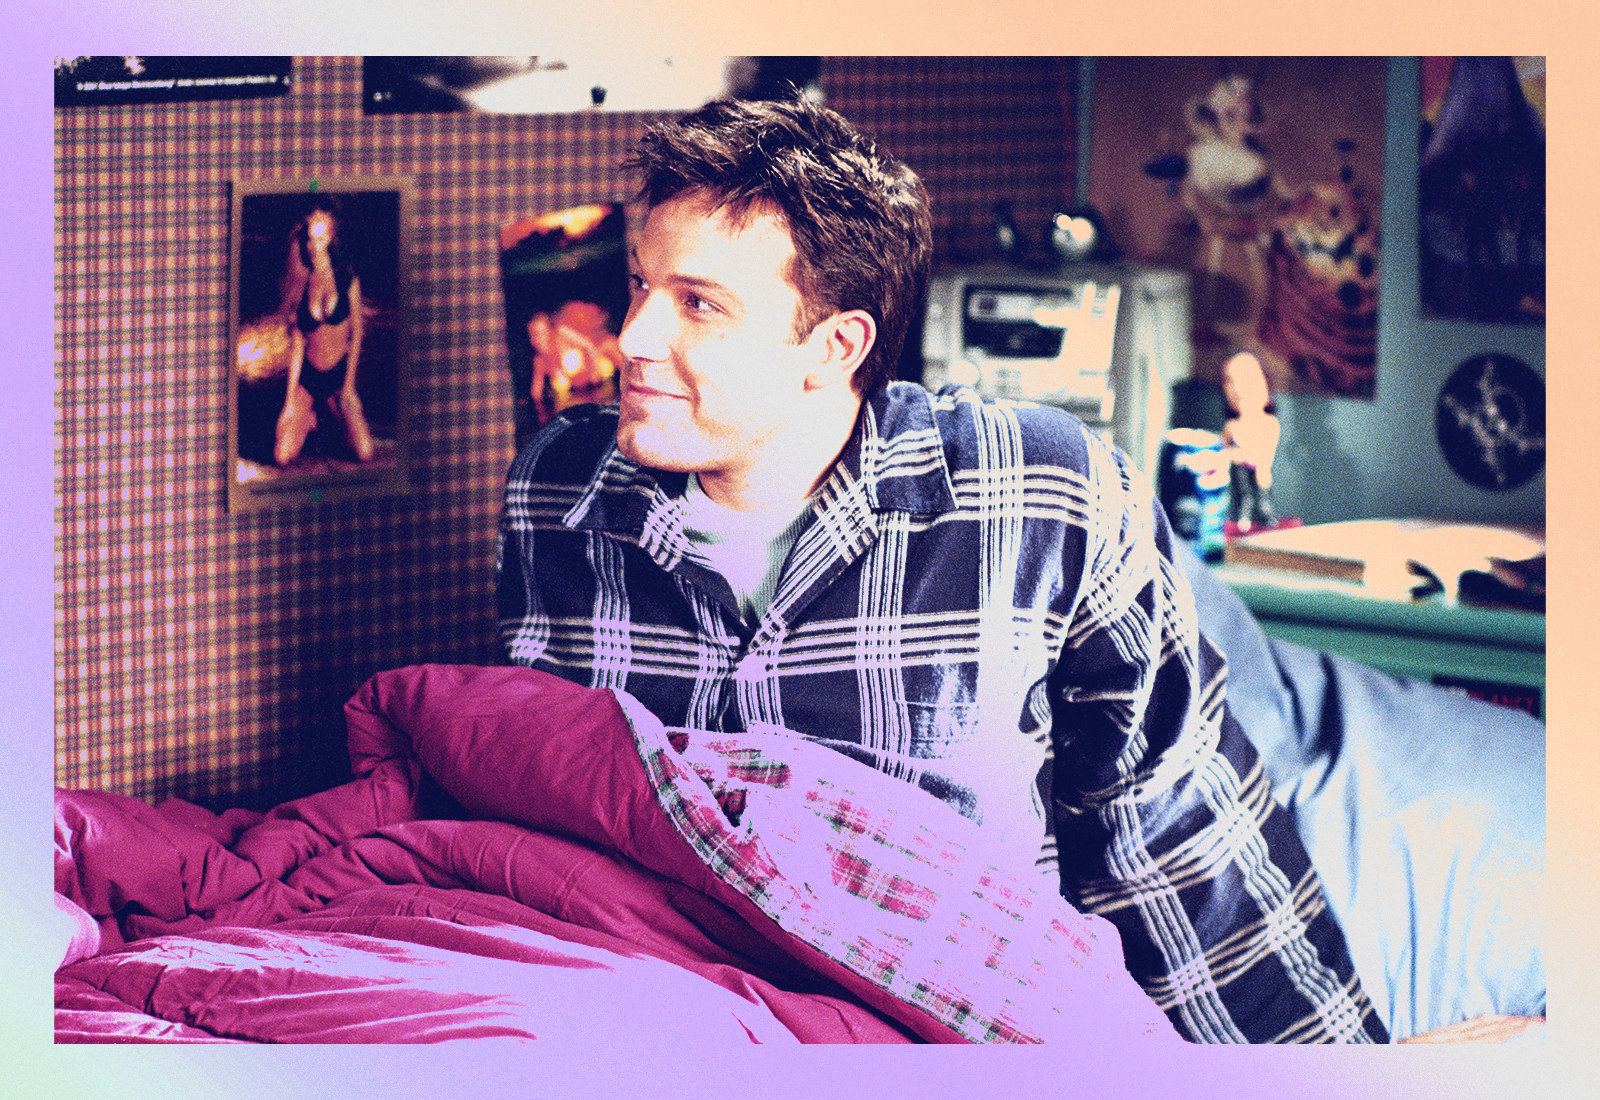 Ben Affleck in pajamas sits up in bed and smiles